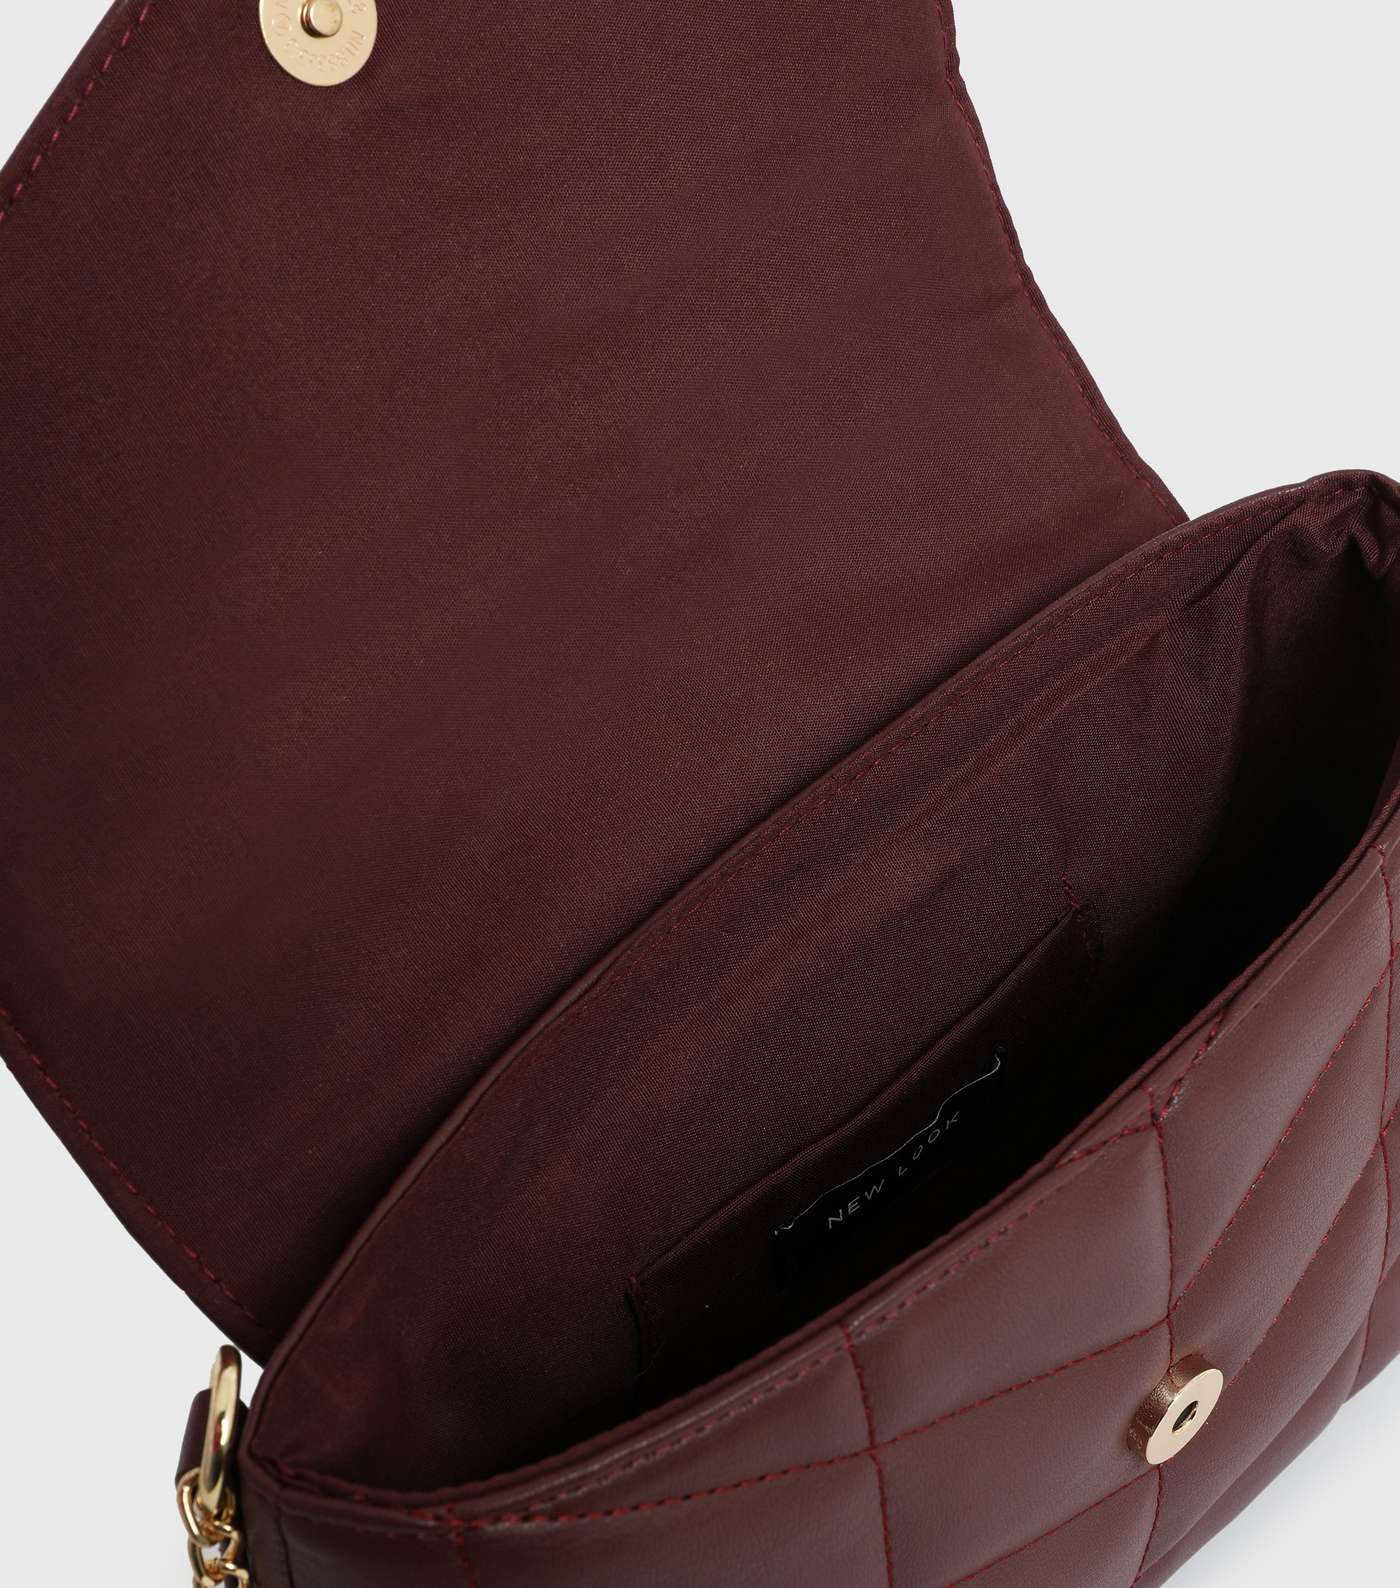 Burgundy Quilted Foldover Cross Body Bag Image 4